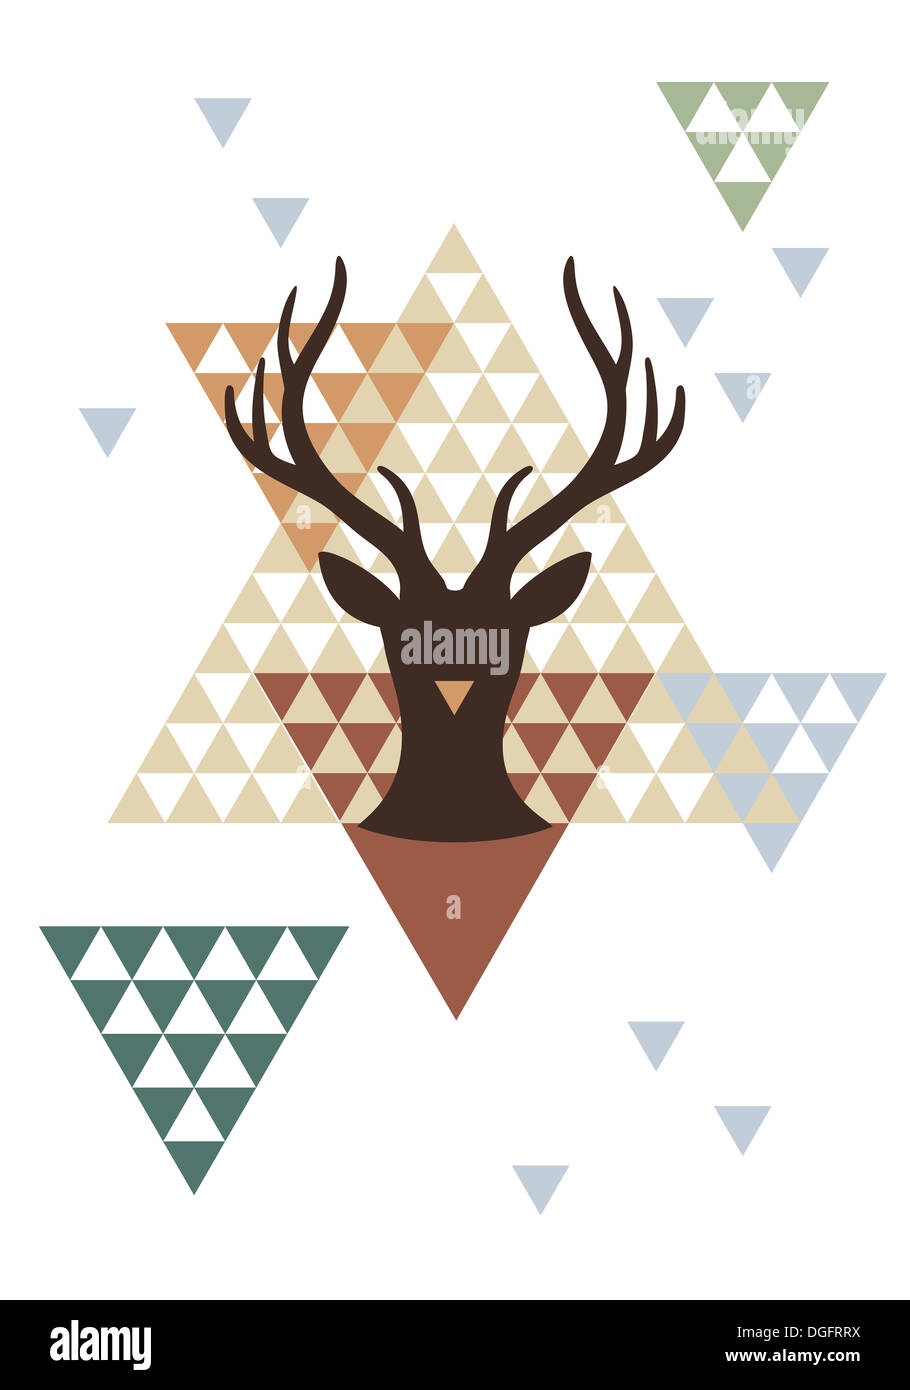 Christmas deer with abstract geometric pattern, vector background illustration Stock Photo